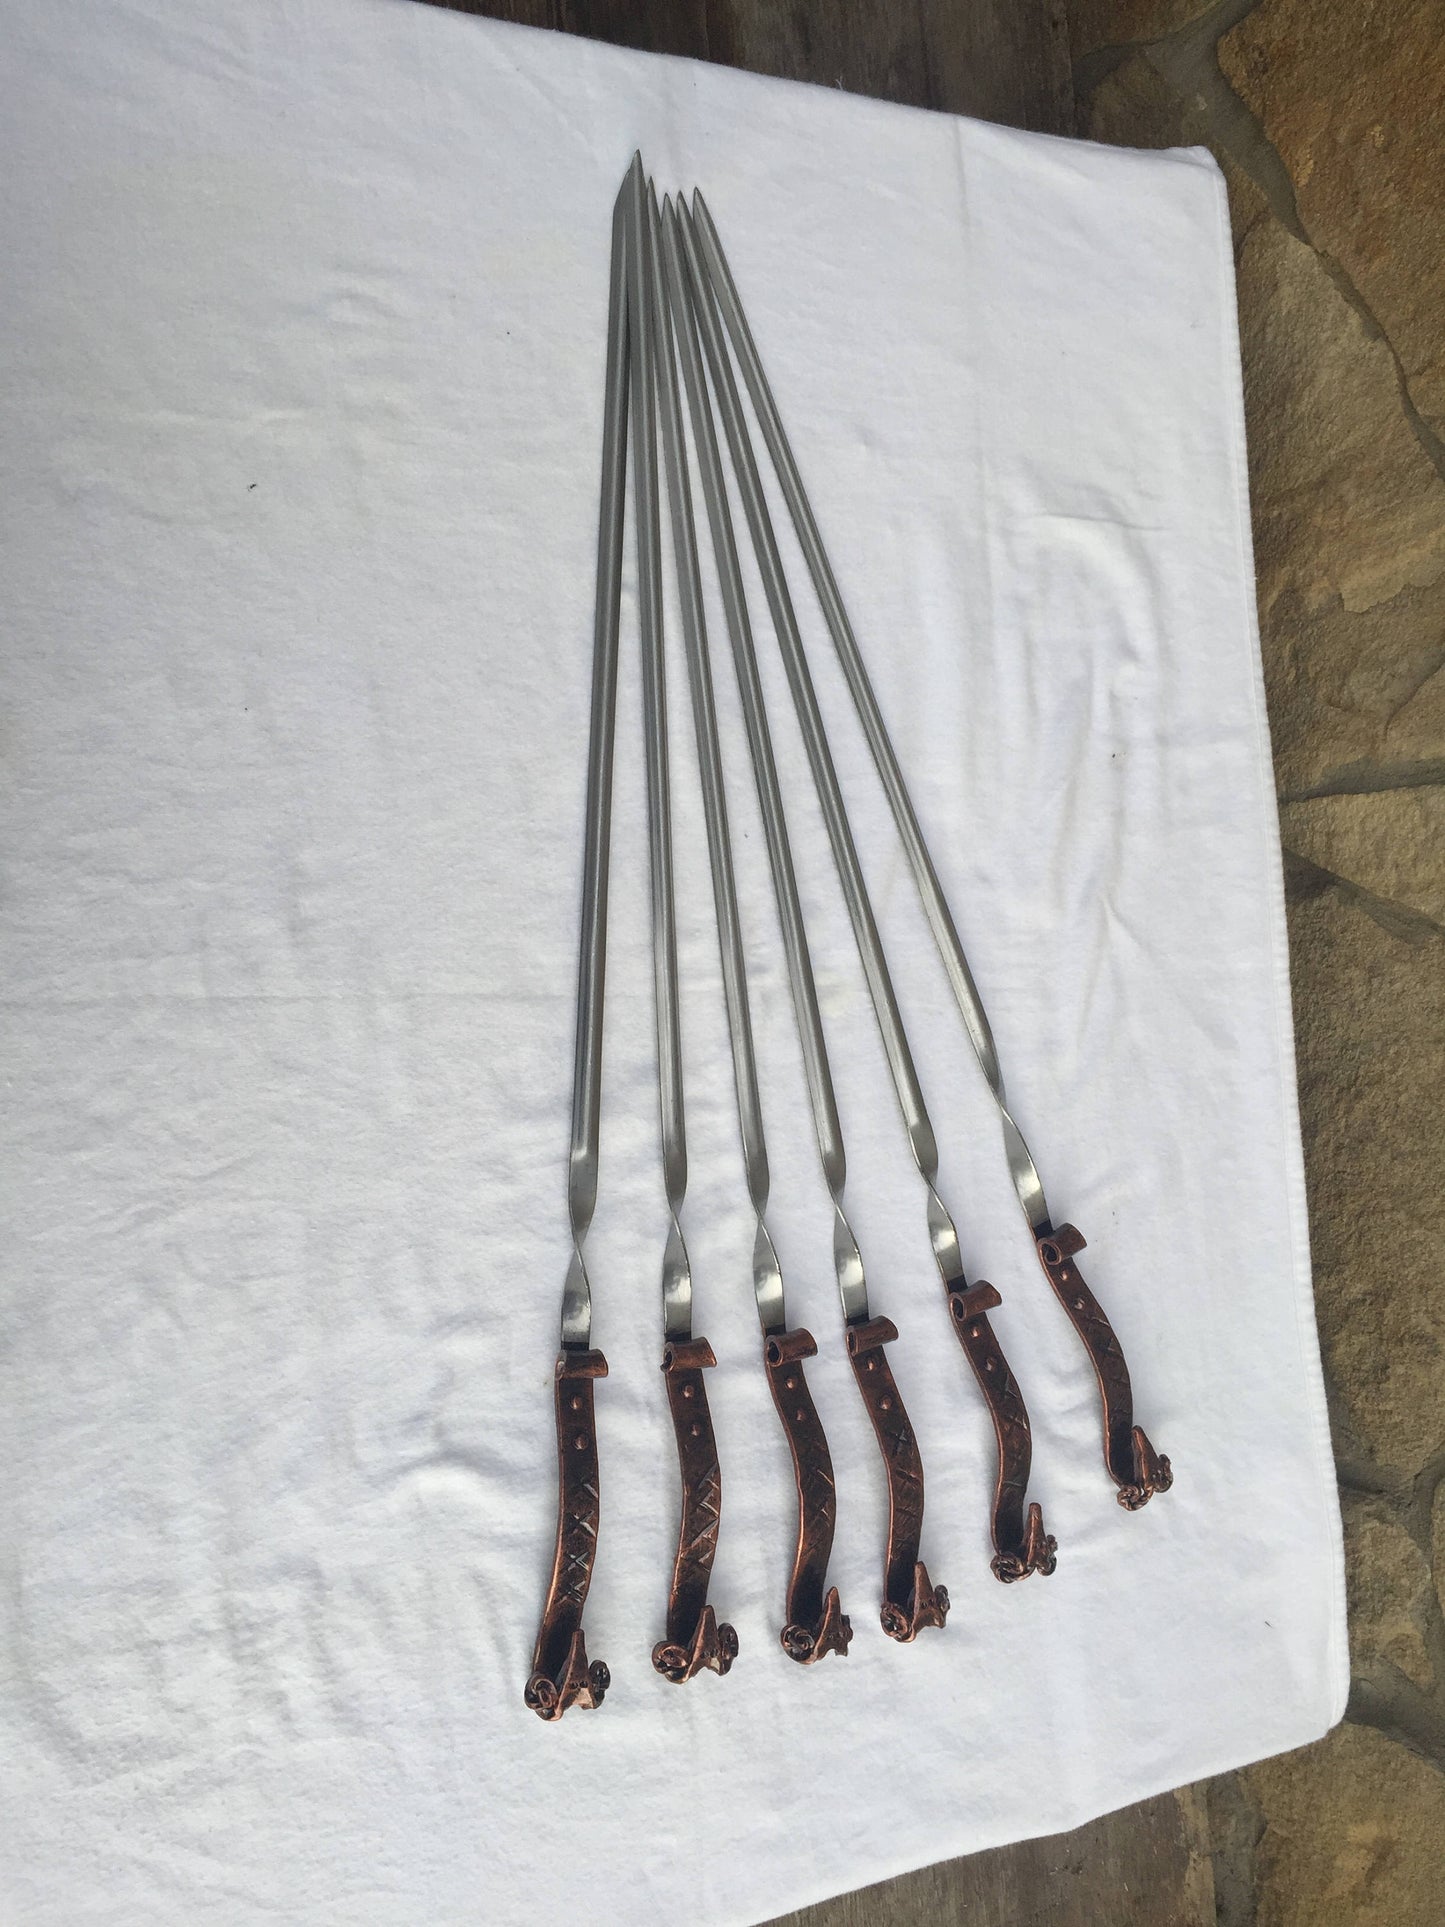 Forged skewers, iron gifts, anniversary gift, grilled meat,grill accessories,metal skewers,barbecue,BBQ,family reunion,picnic,barbecue party